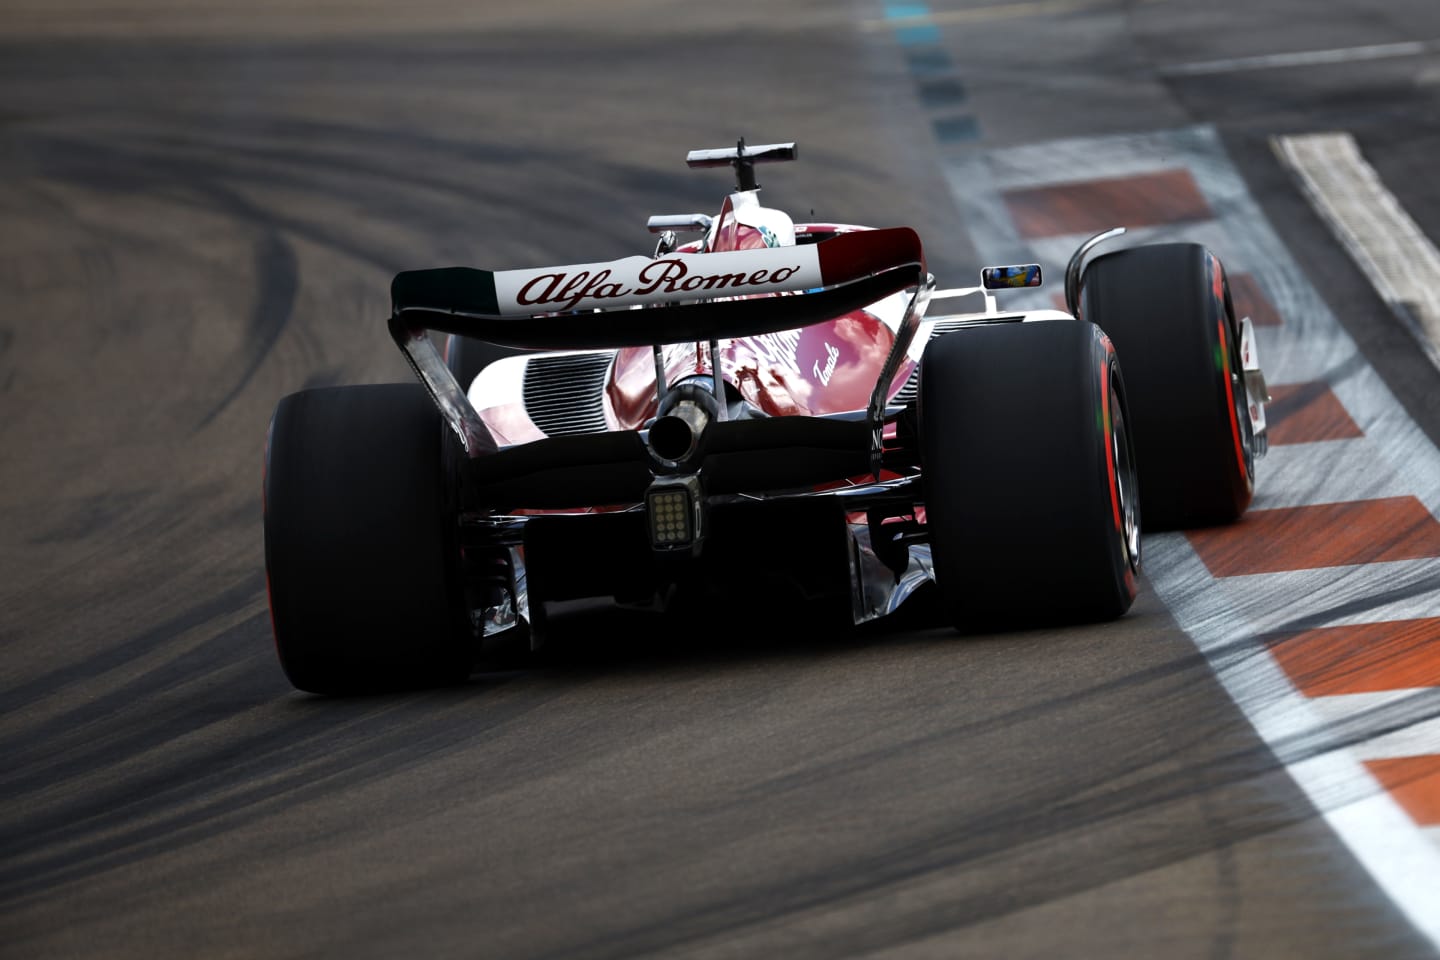 MIAMI, FLORIDA - MAY 07: Valtteri Bottas of Finland driving the (77) Alfa Romeo F1 C42 Ferrari on track during final practice ahead of the F1 Grand Prix of Miami at the Miami International Autodrome on May 07, 2022 in Miami, Florida. (Photo by Jared C. Tilton/Getty Images)